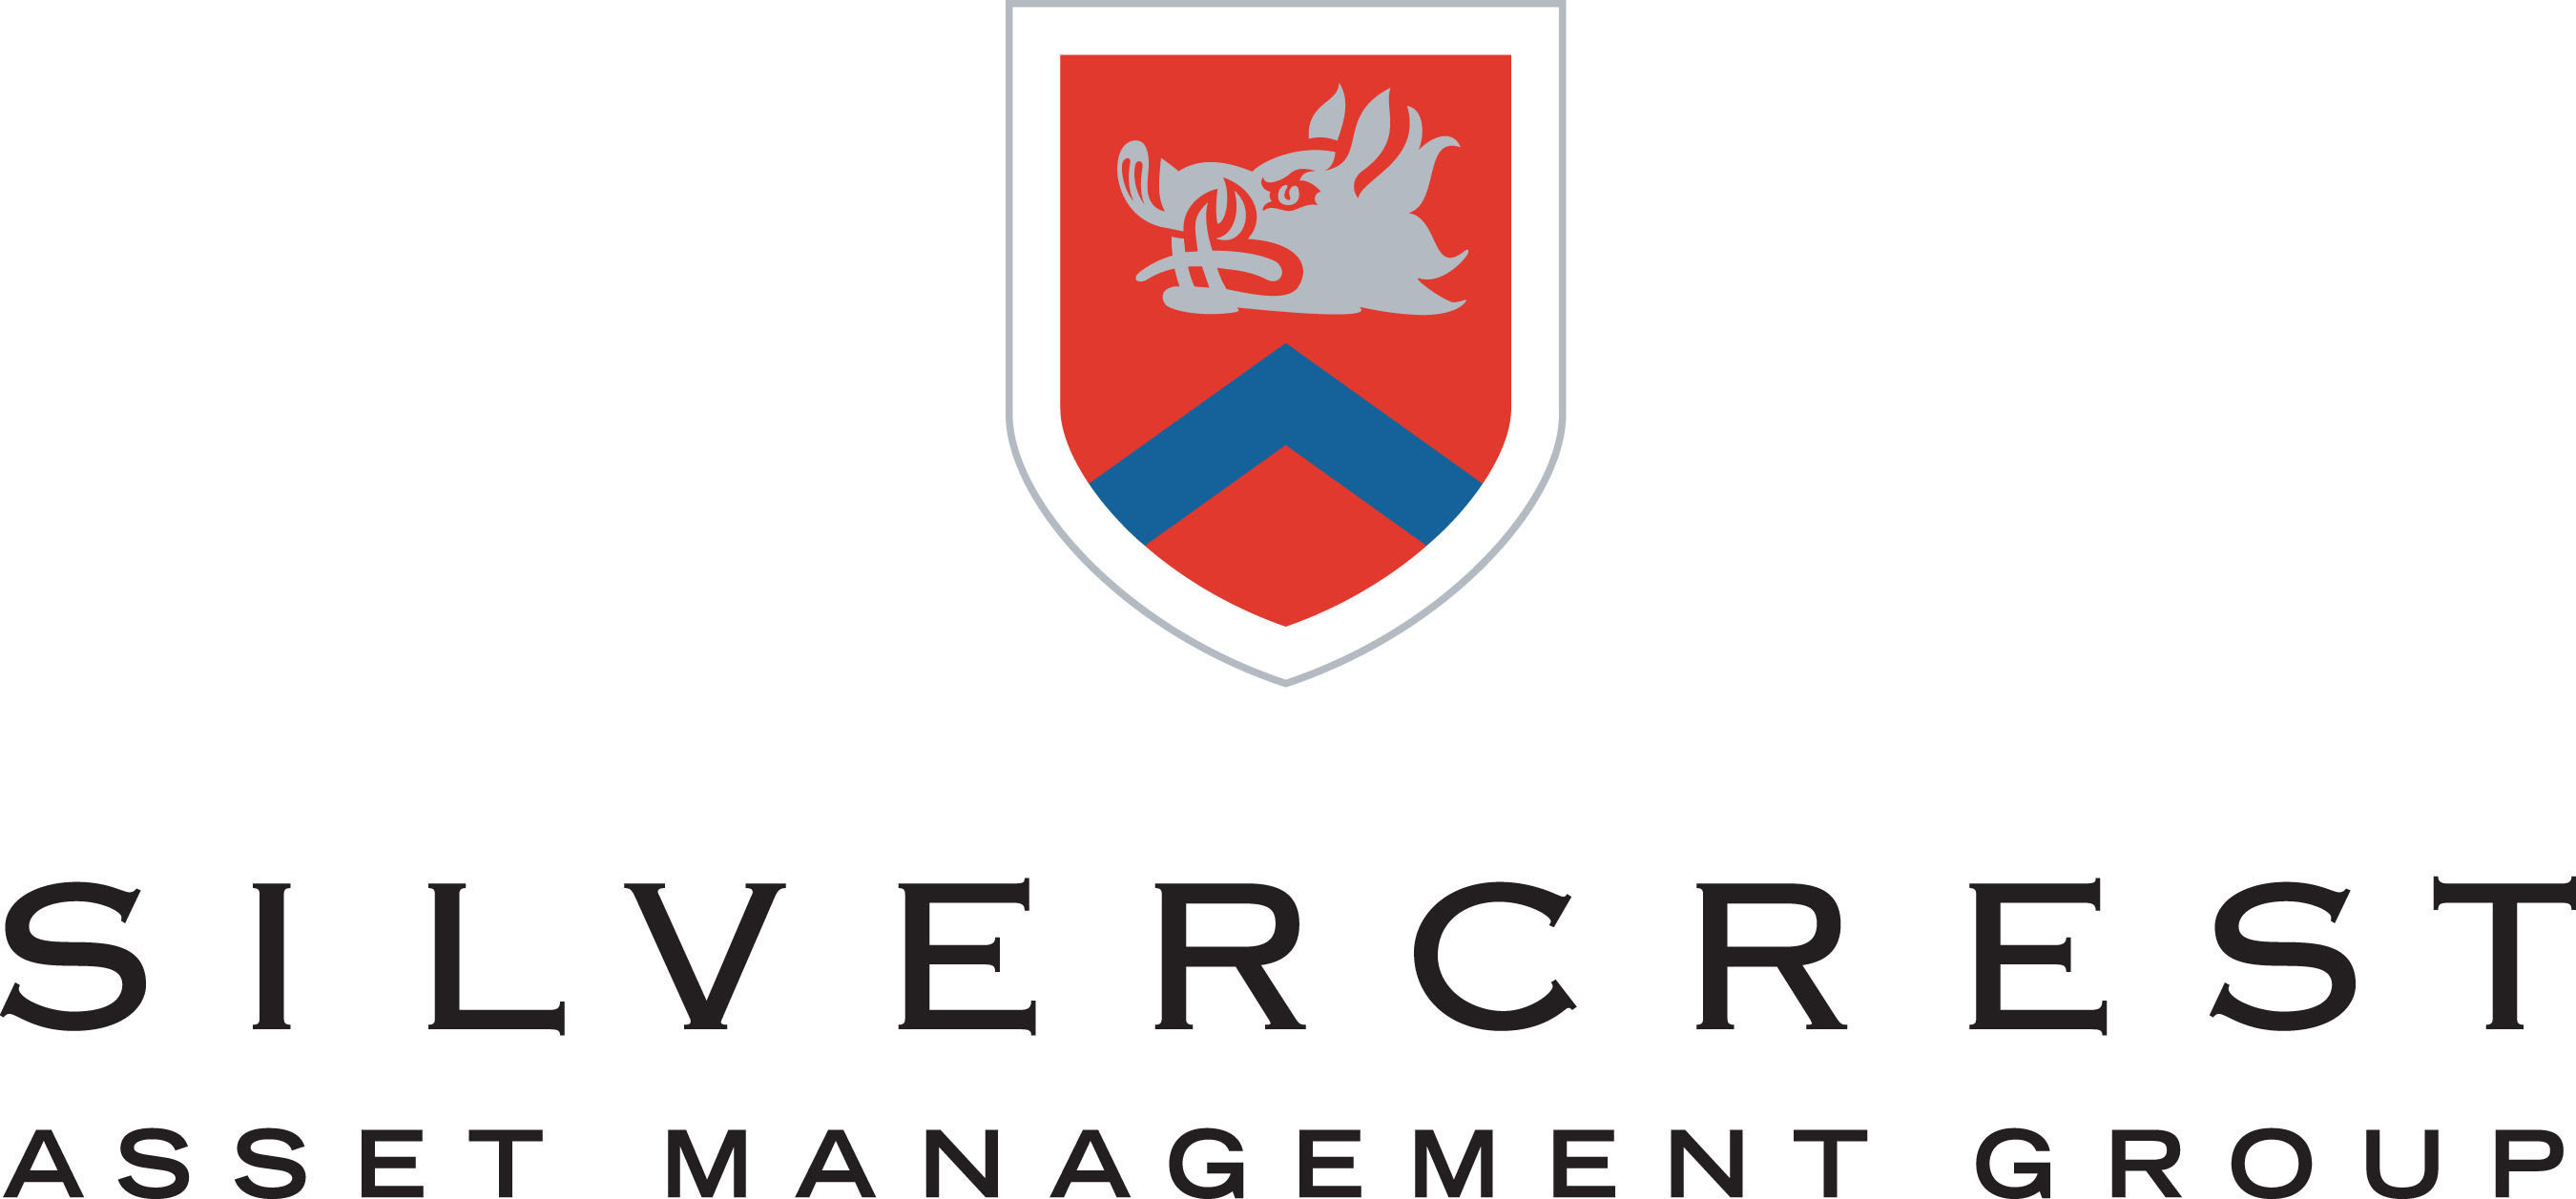 Silvercrest Asset Management Group announces appointment of Richard Burns to Board of Directors